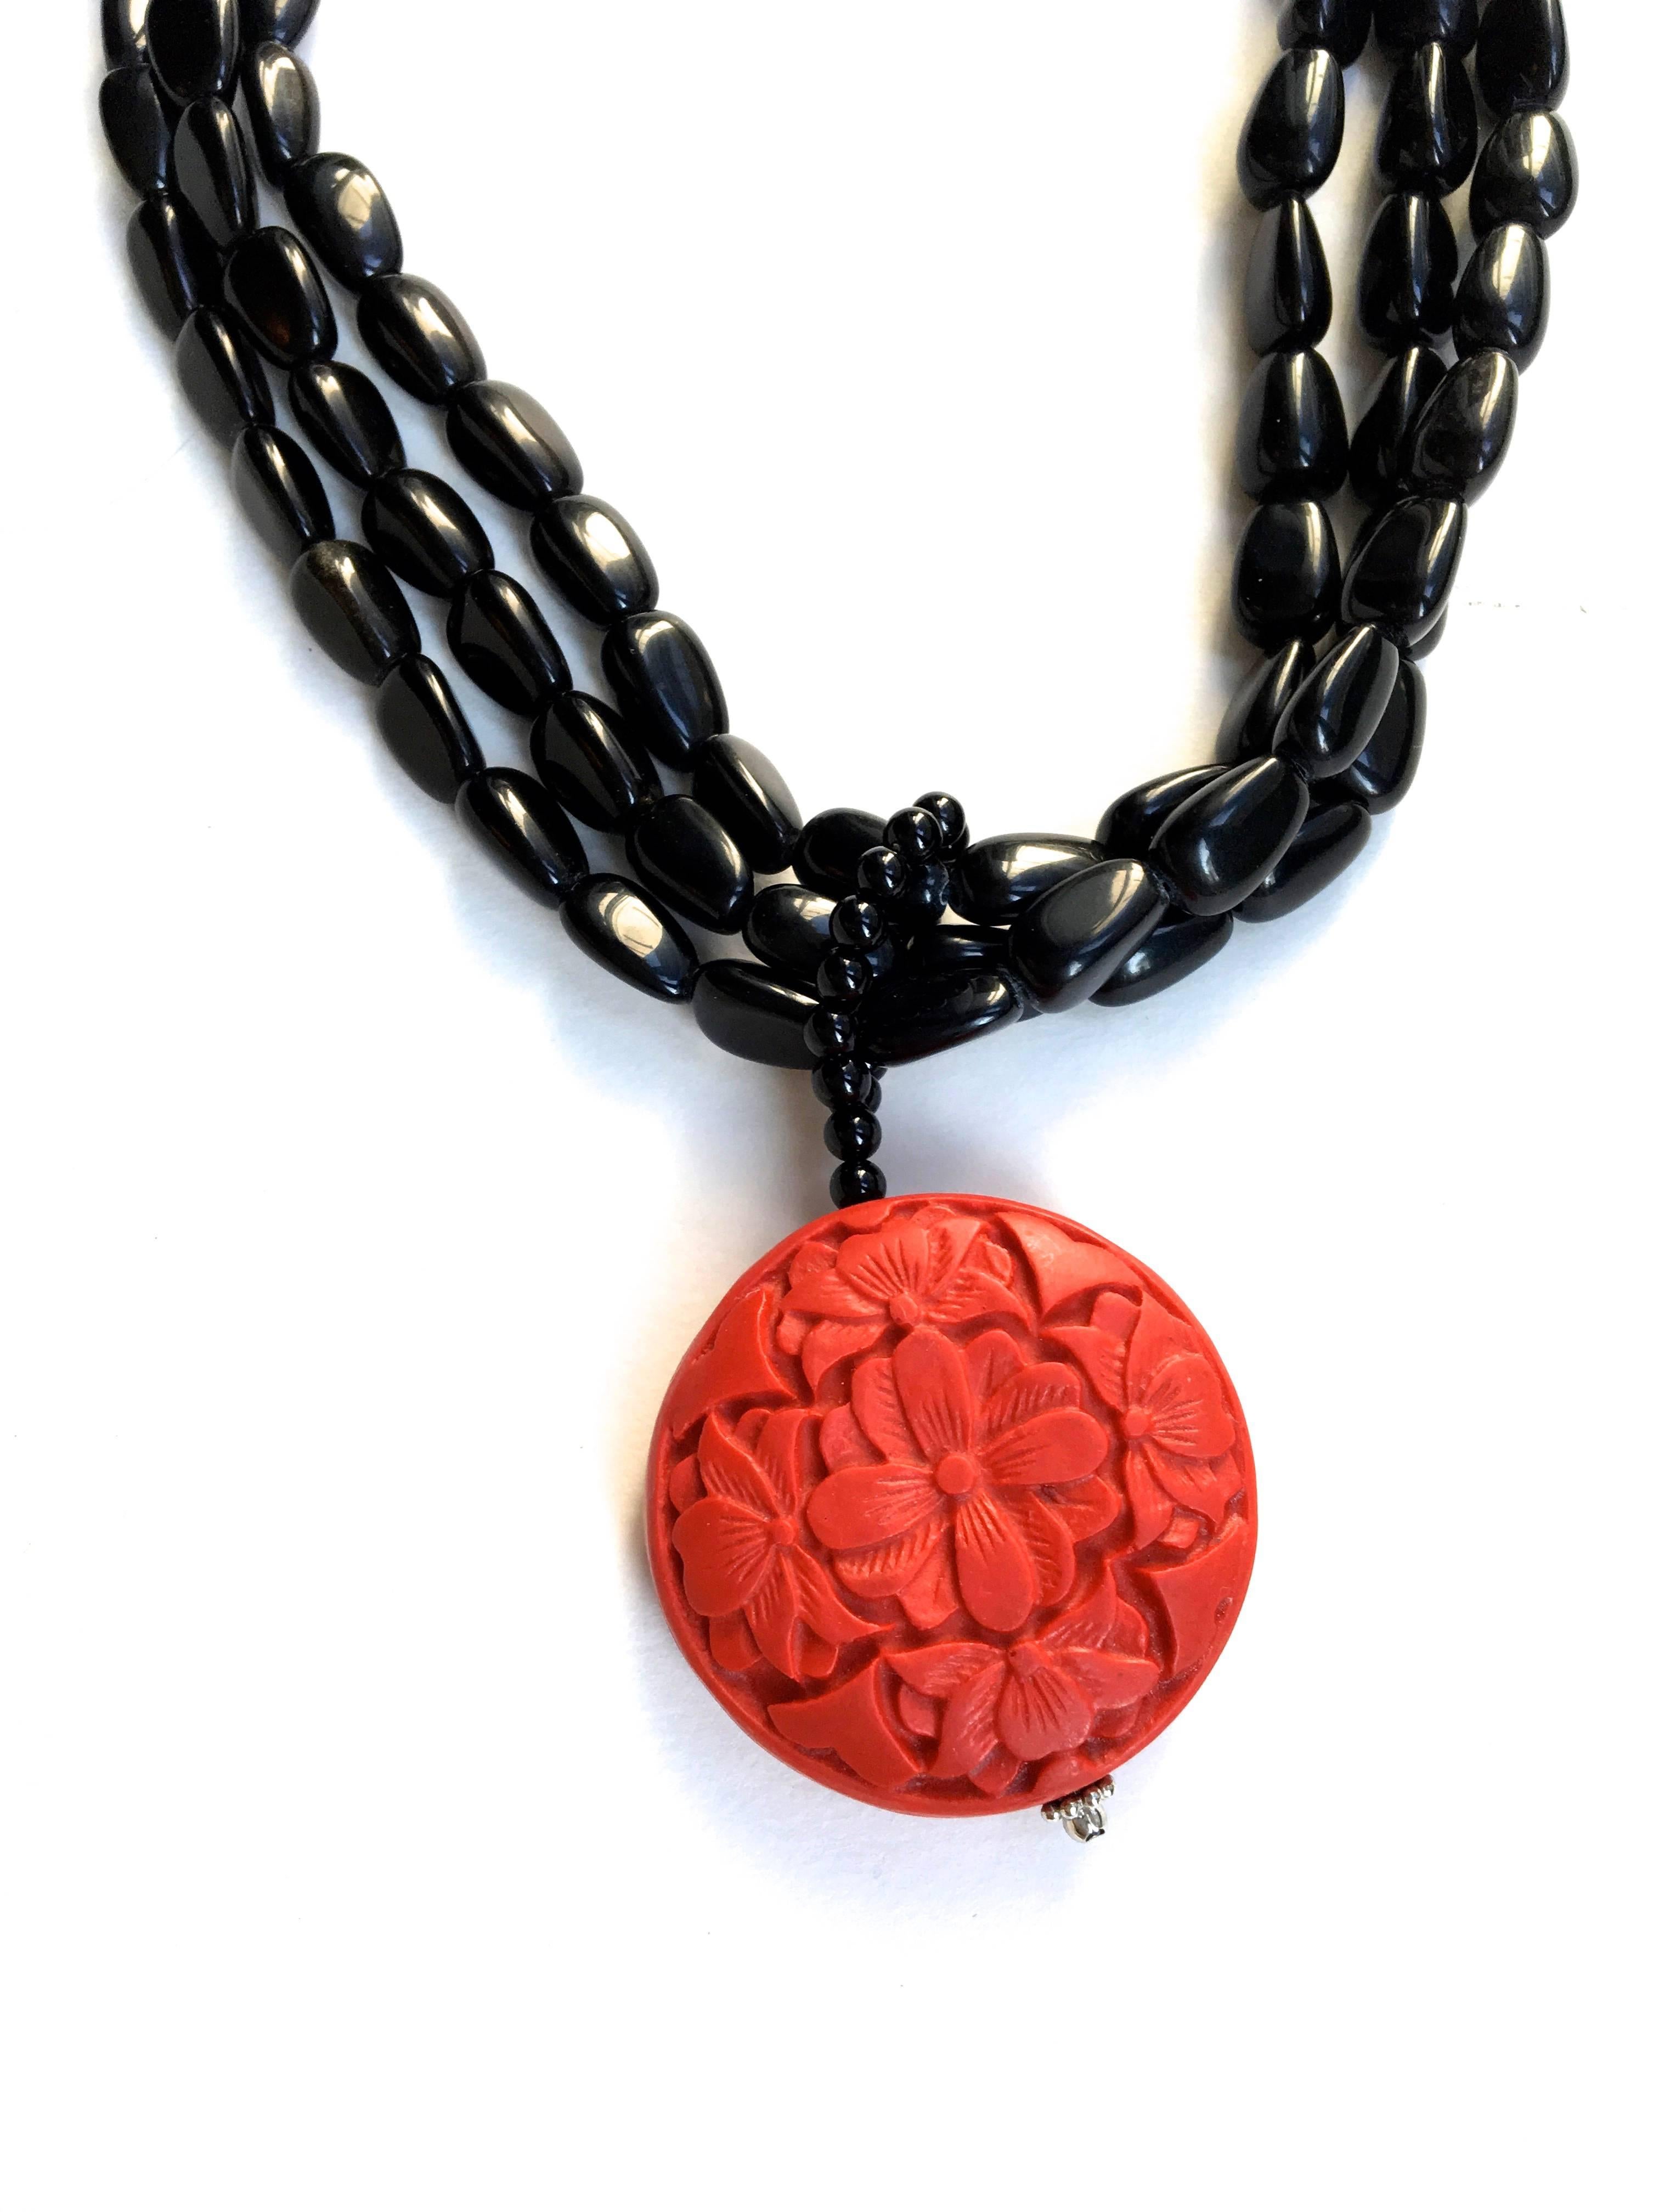 Presented here is a fabulous Asian pendant necklace. This necklace is comprised of three strands of black beads strung together with a hook clasp at the back. The main pendant on the necklace is a gorgeously articulated piece of cinnabar with